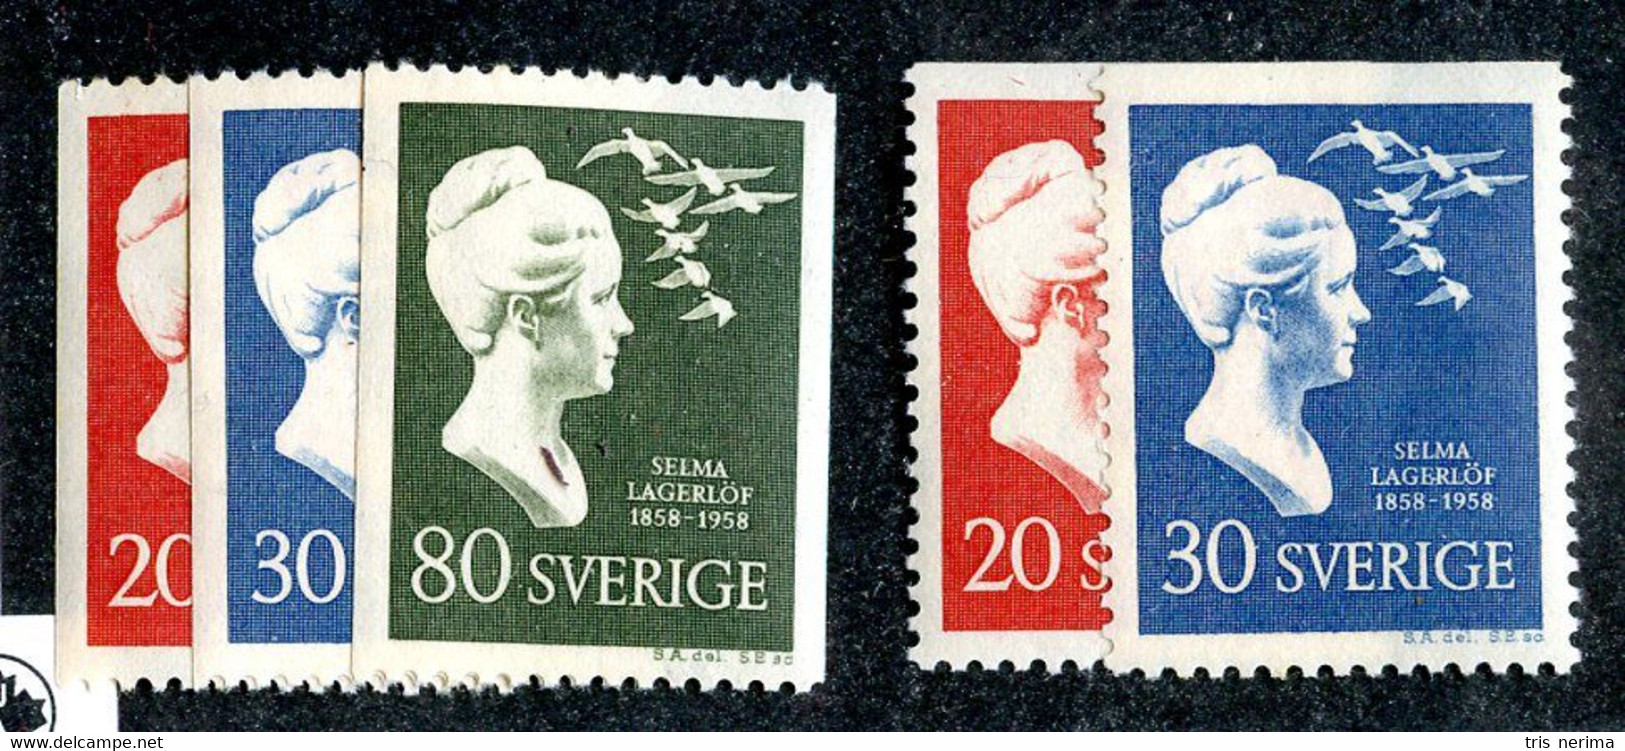 377 Sweden 1958 Scott 532/36 -m* (Offers Welcome!) - Unused Stamps